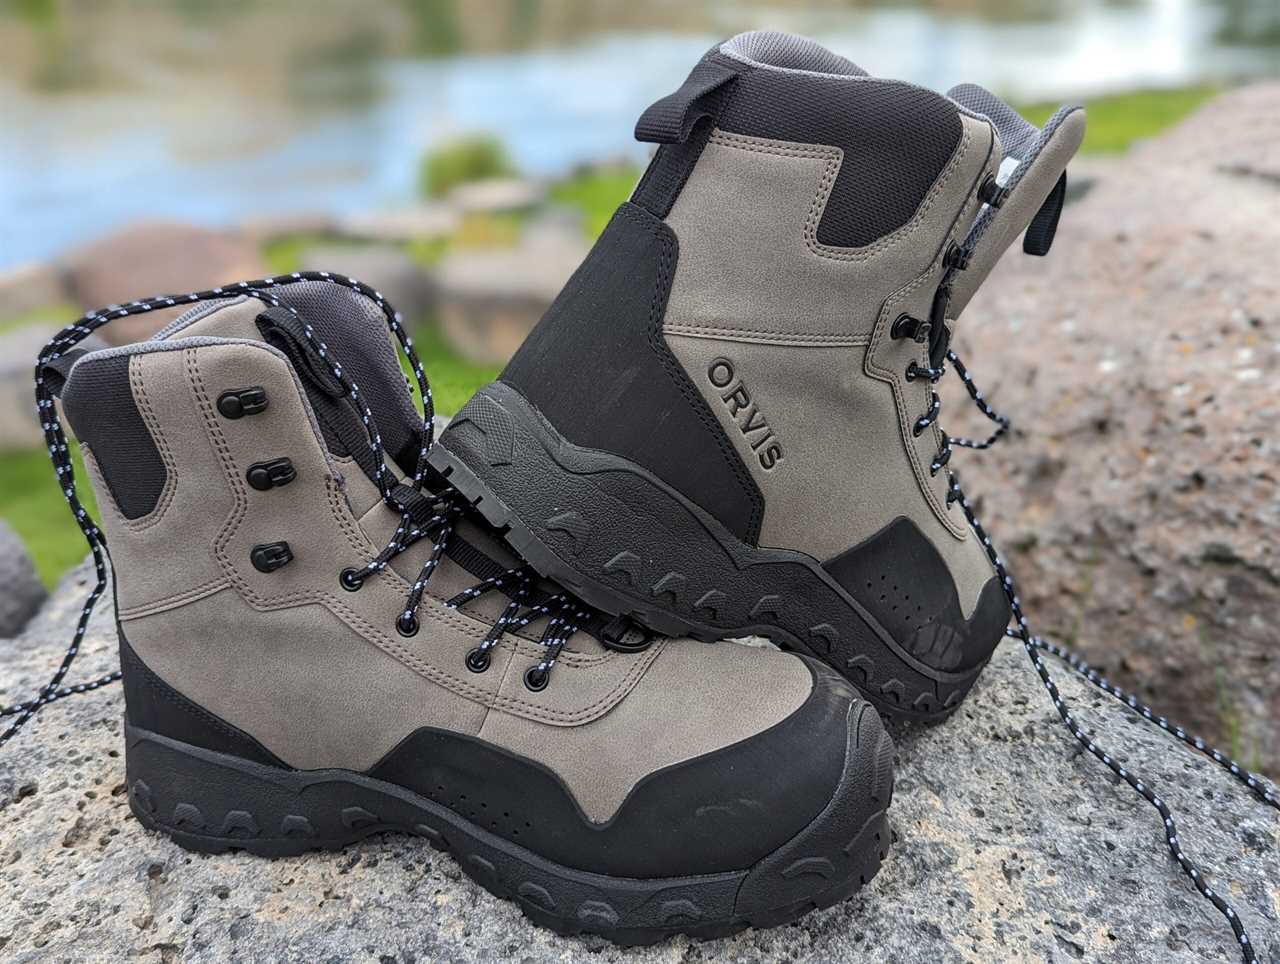 The best wading boots for the money